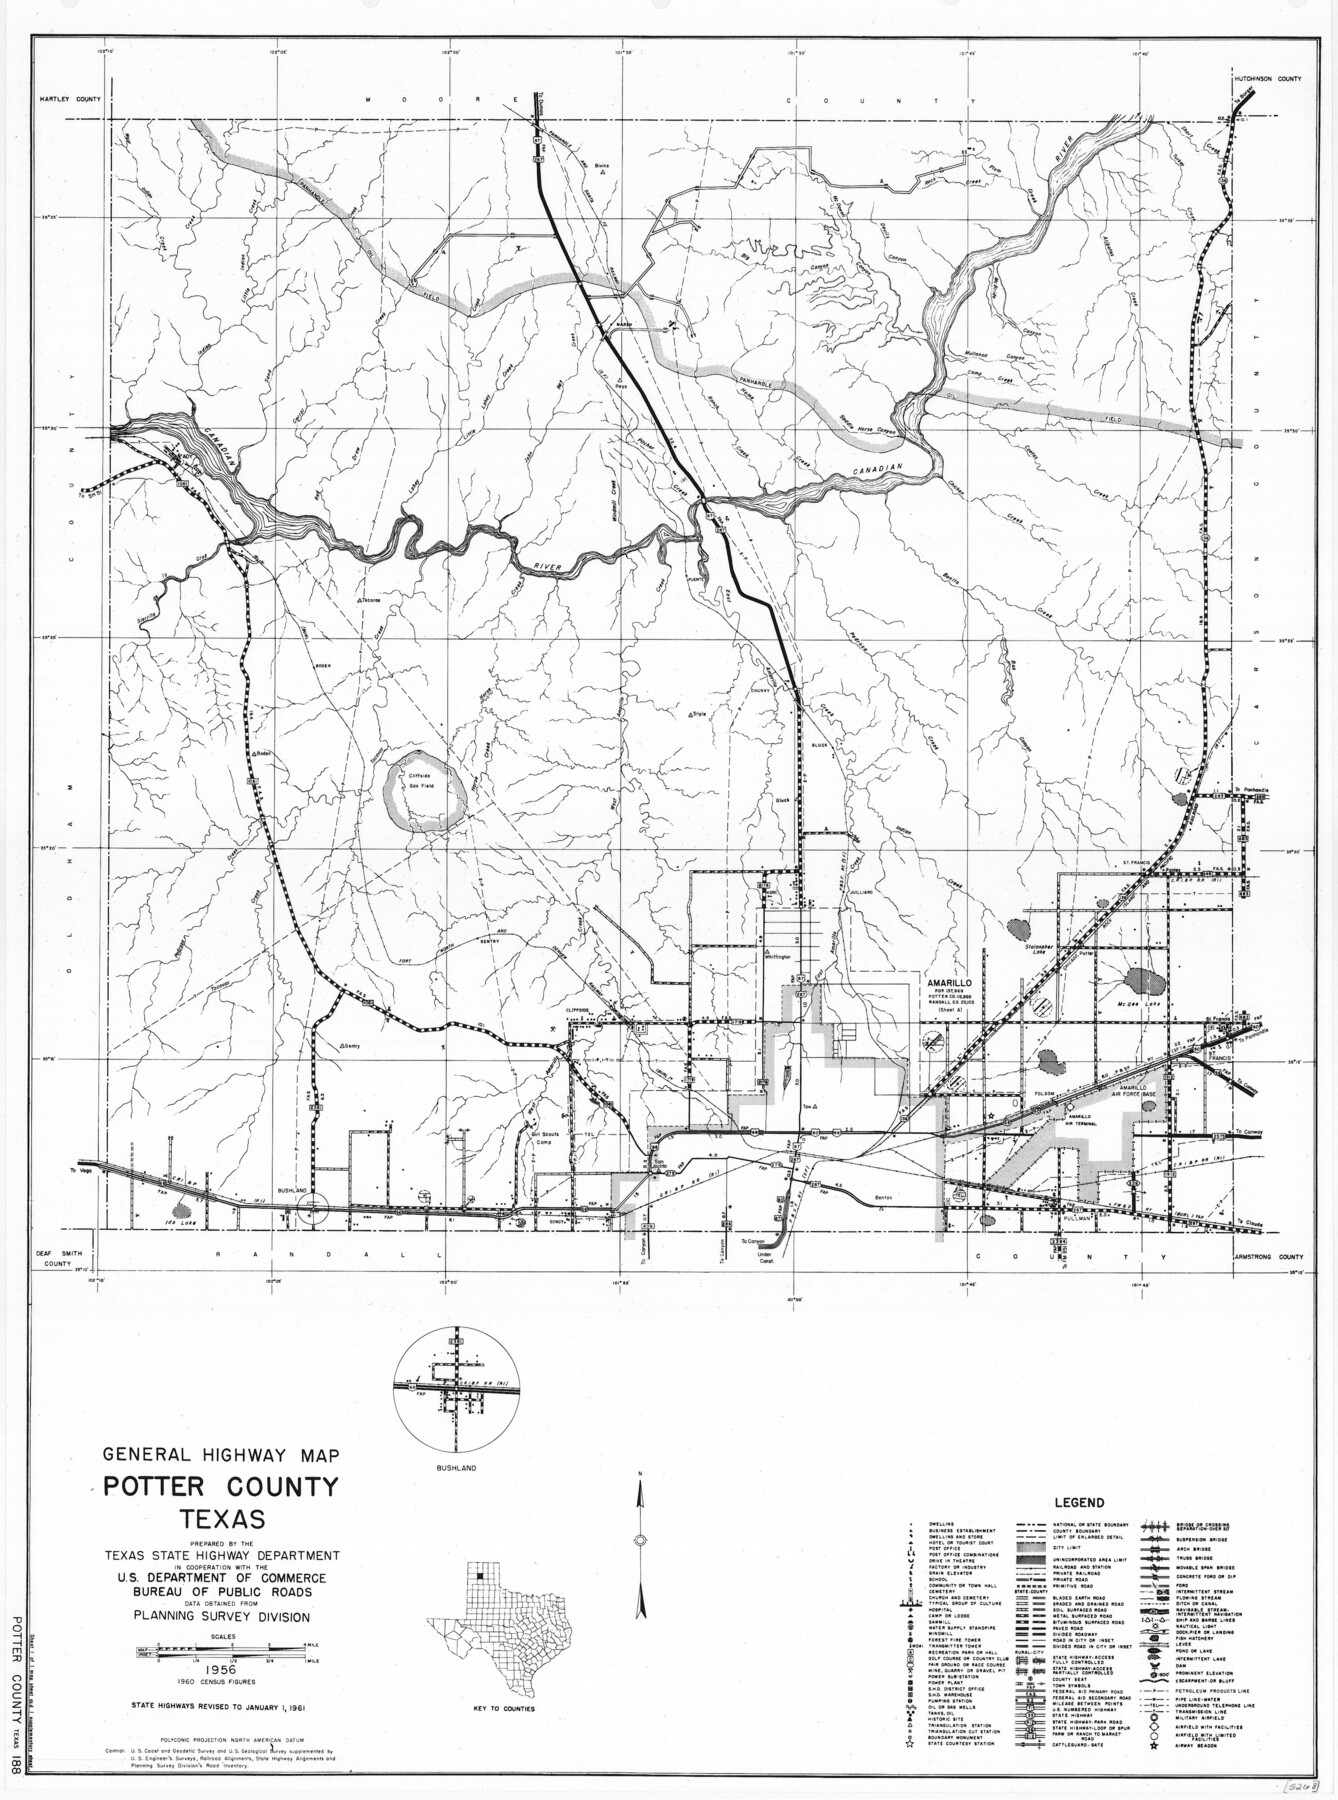 79631, General Highway Map, Potter County, Texas, Texas State Library and Archives